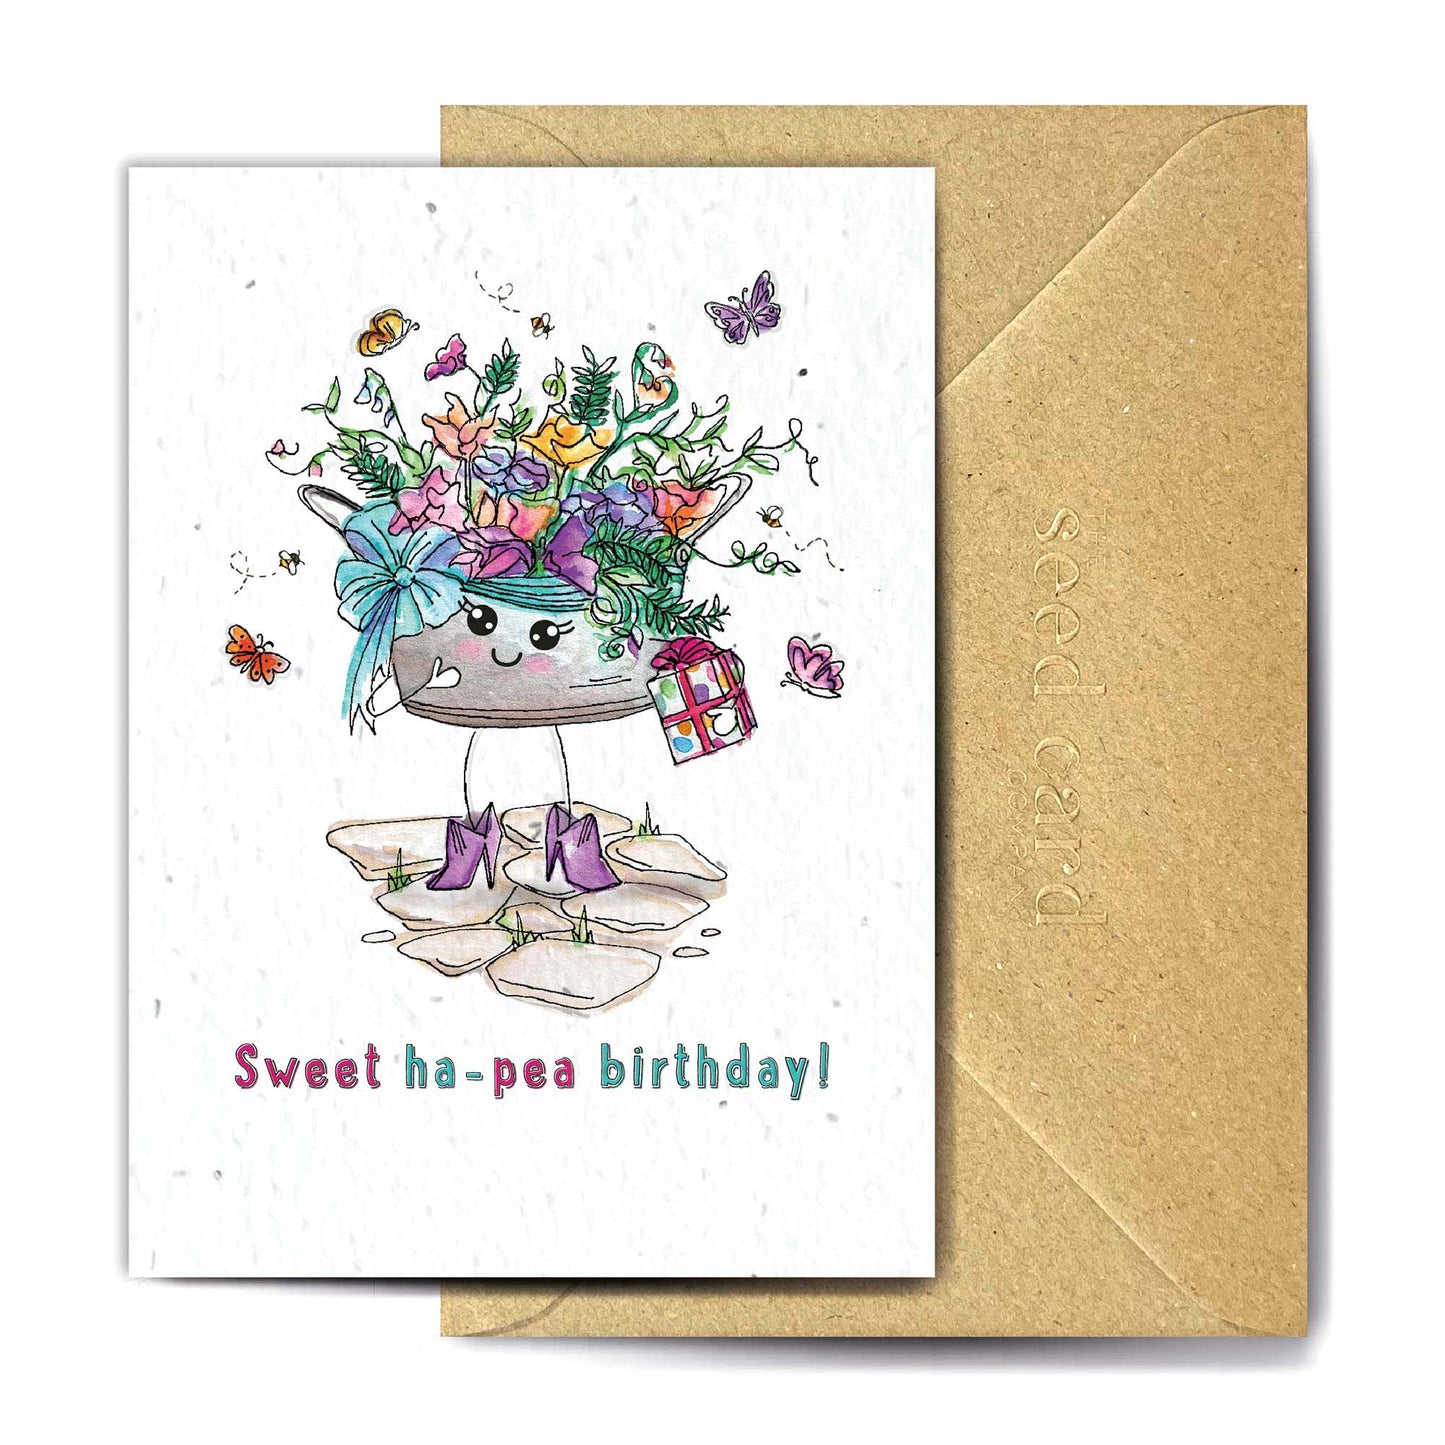 The Seed Collections - Greetings Cards